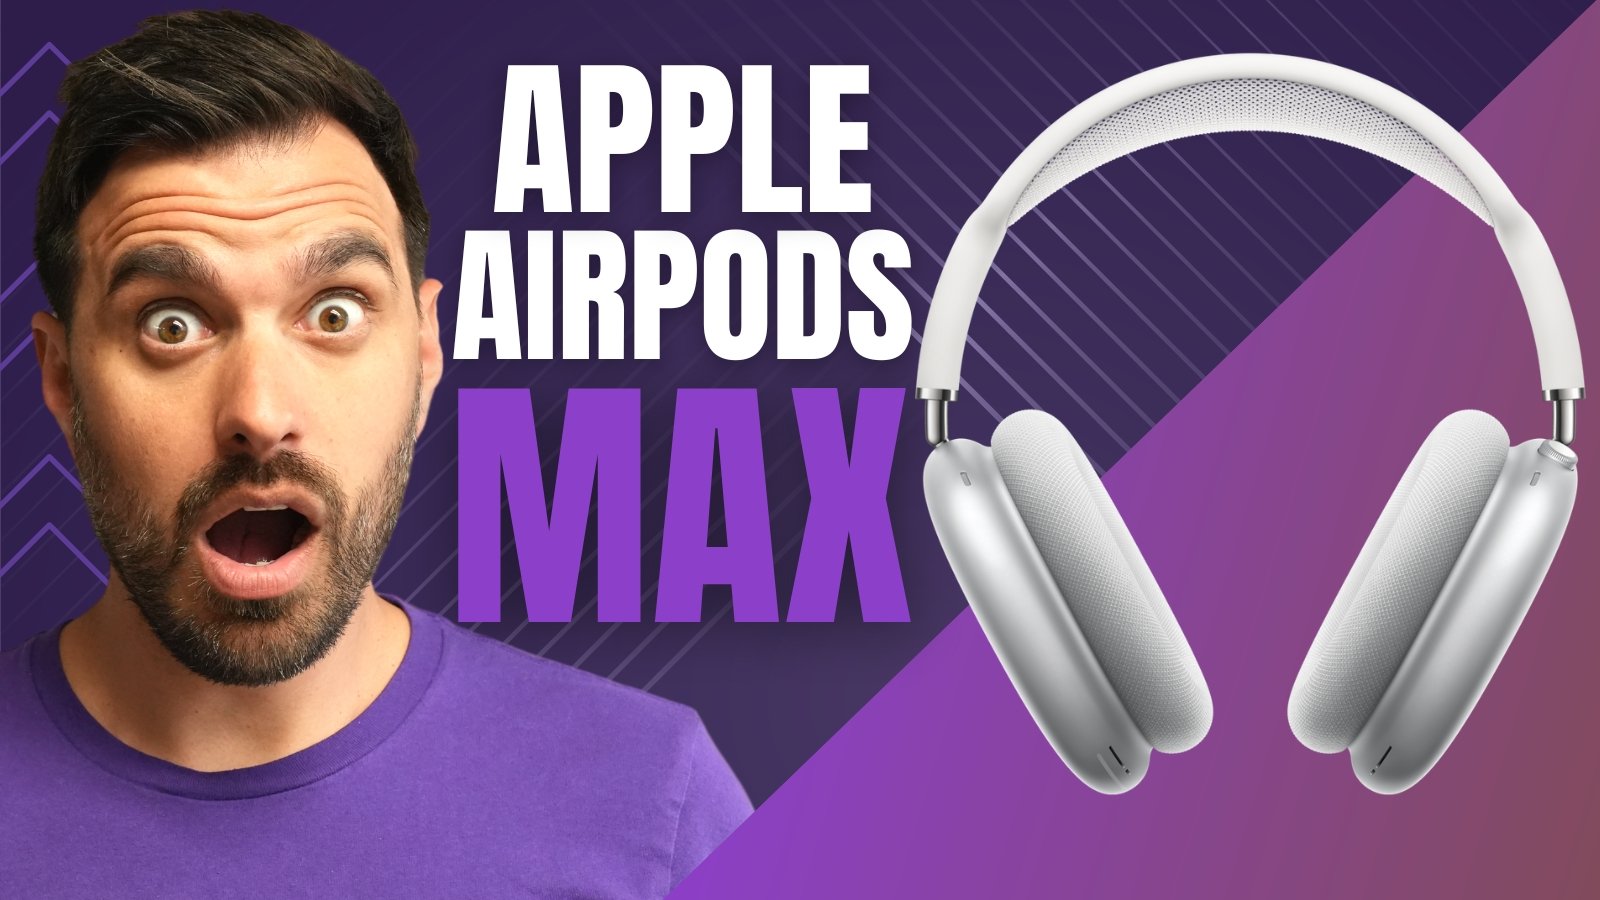 Apple AirPods Max review: the best wireless headphones for Apple users